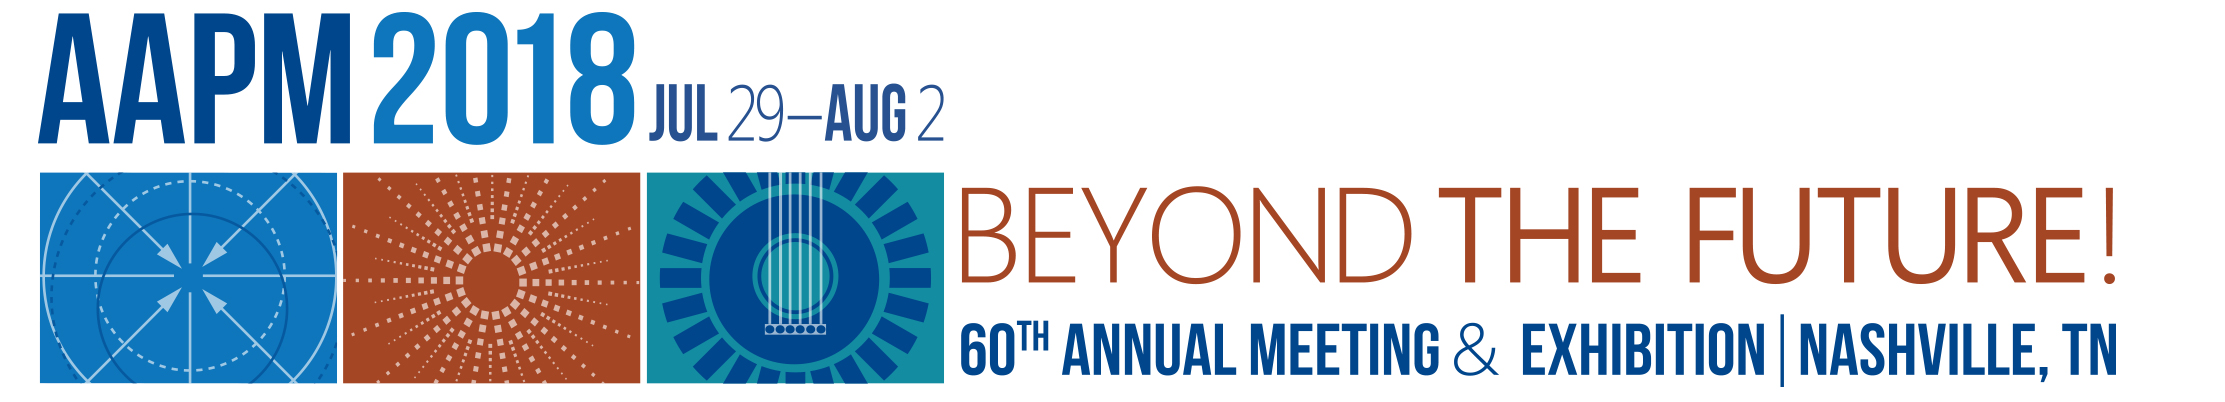 Picture of AAPM 2018 Meeting Logo